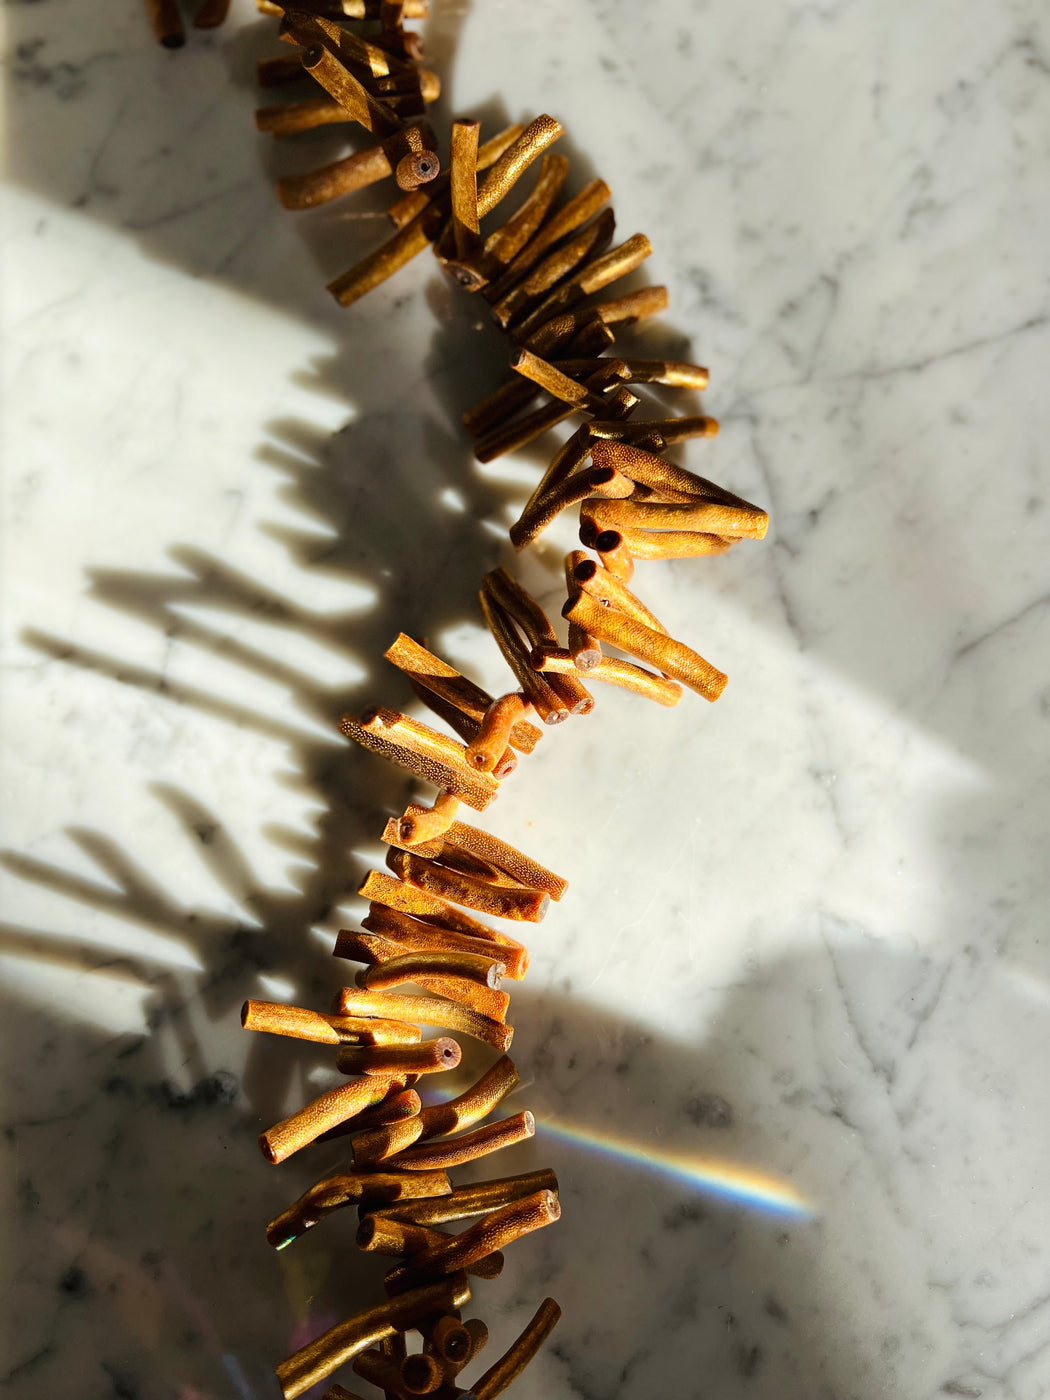 Embellish your space with a golden coral window prism - hang in a sunny spot & watch the rainbows dance! Chunky coral beads with a gold finish, beaded on sturdy wire, faceted prism.  Coral - an amulet from the sea, provides protection over the feminine & our emotional waters.